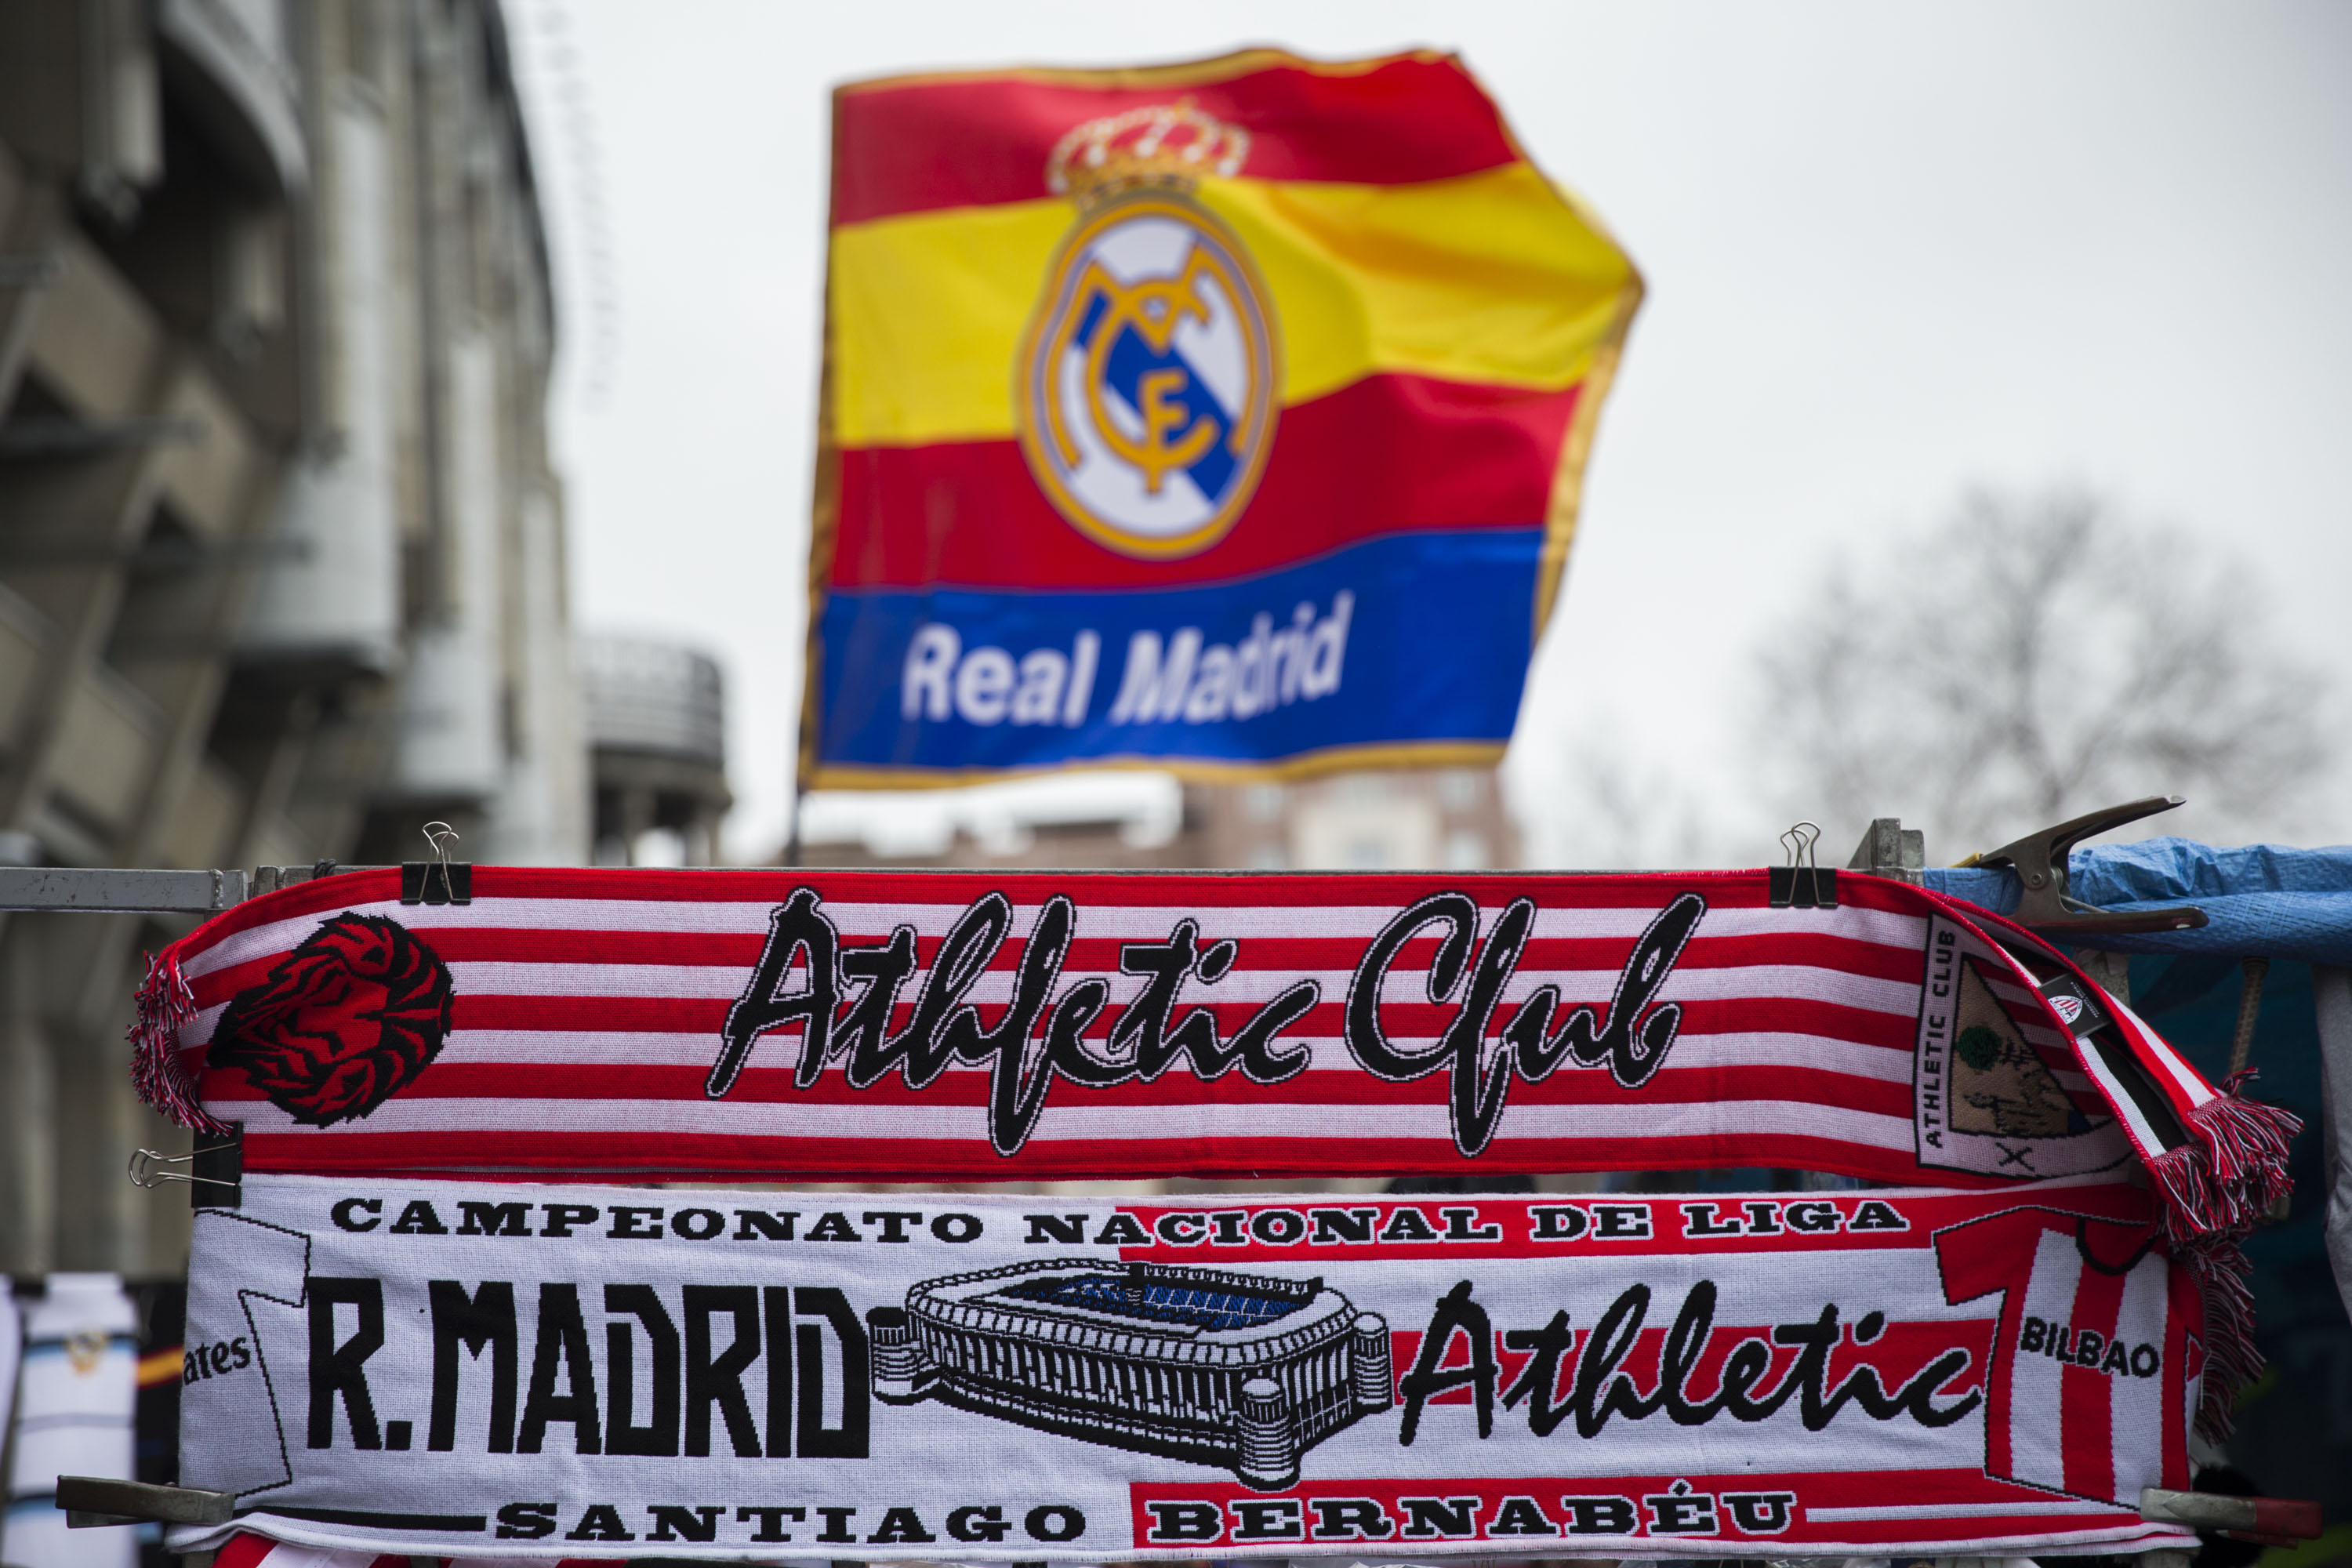 MADRID, SPAIN - FEBRUARY 13: The match scarf is displayed behind an Athletic Club one at a merchandaising stall before  the La Liga match between Real Madrid CF and Athletic Club at Estadio Santiago Bernabeu outdoors on February 13, 2016 in Madrid, Spain.  (Photo by Gonzalo Arroyo Moreno/Getty Images)